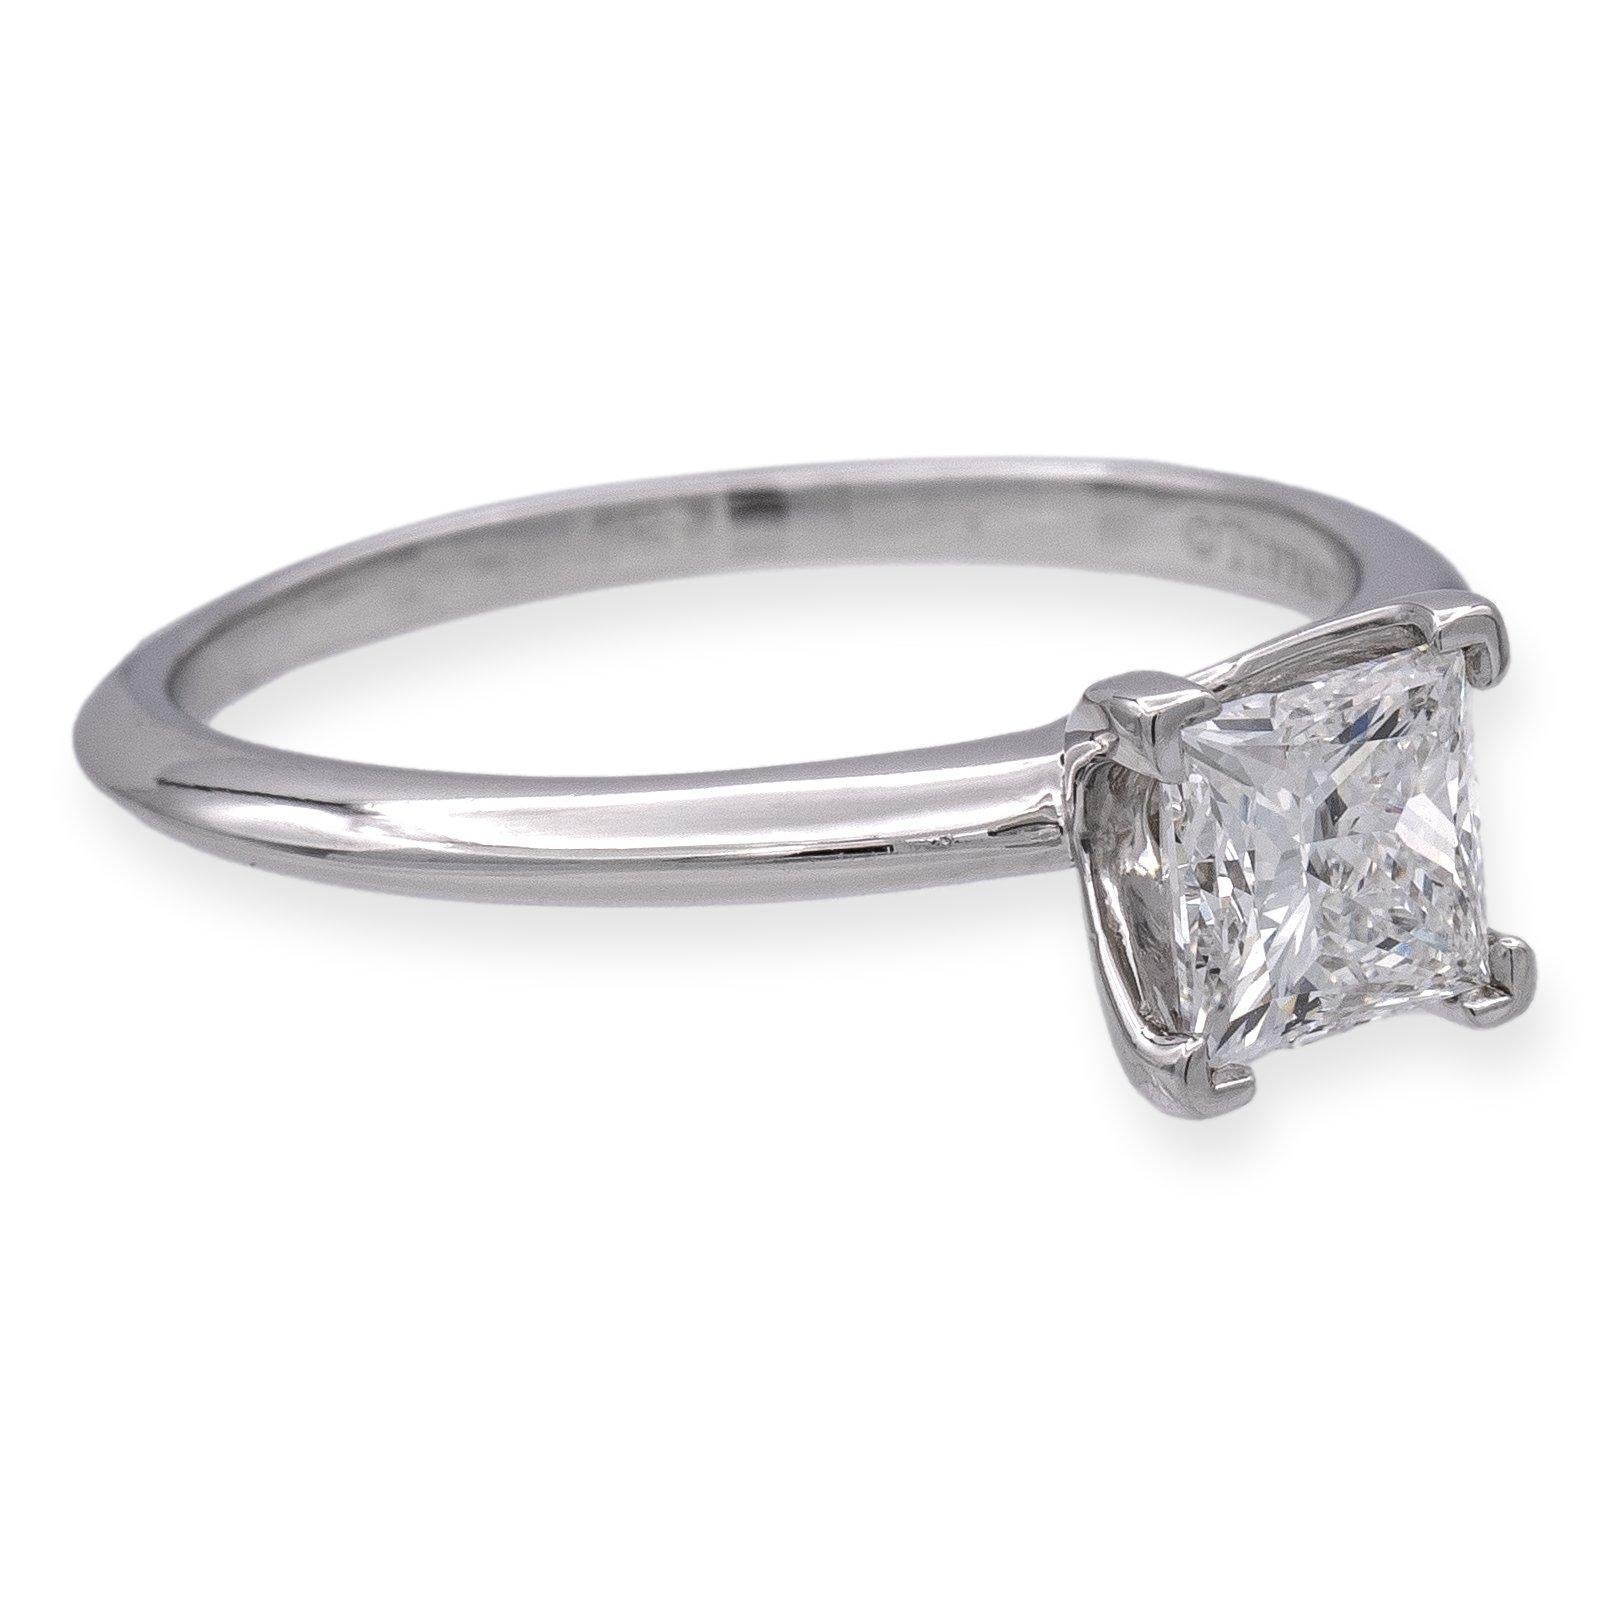 Tiffany & Co. Diamond Engagement Ring. A stunning 1.01 ct princess-cut diamond, graded E color and VS1 clarity, takes center stage in a platinum setting. Every detail exudes perfection, from the flawless stone to the elegant craftsmanship.